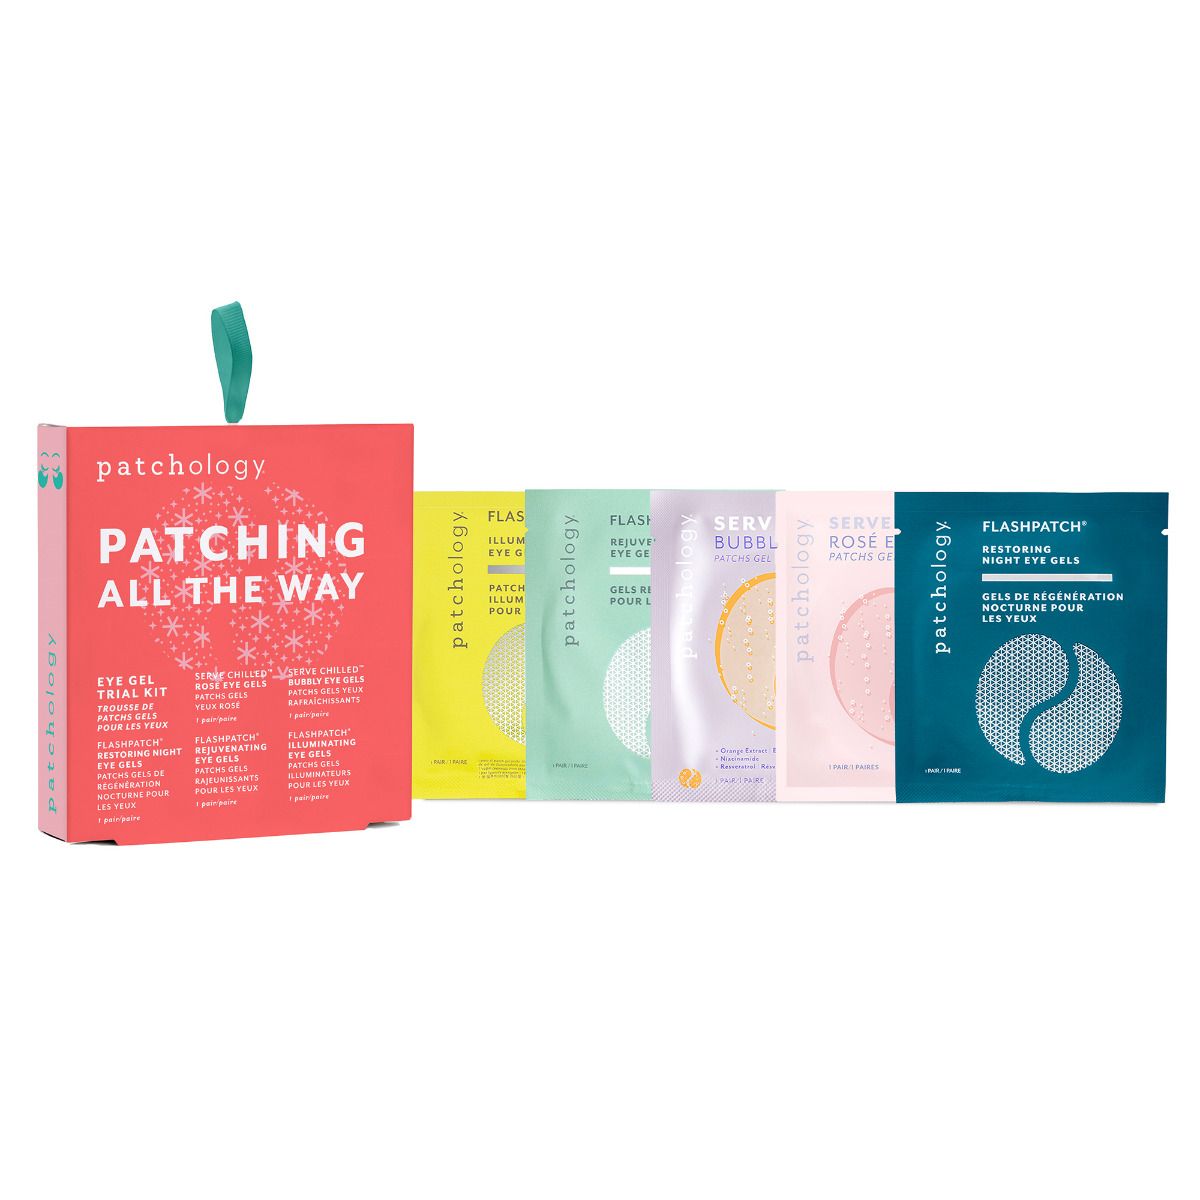 Patchology Patching All The Way: Eye Gel Trial Kit